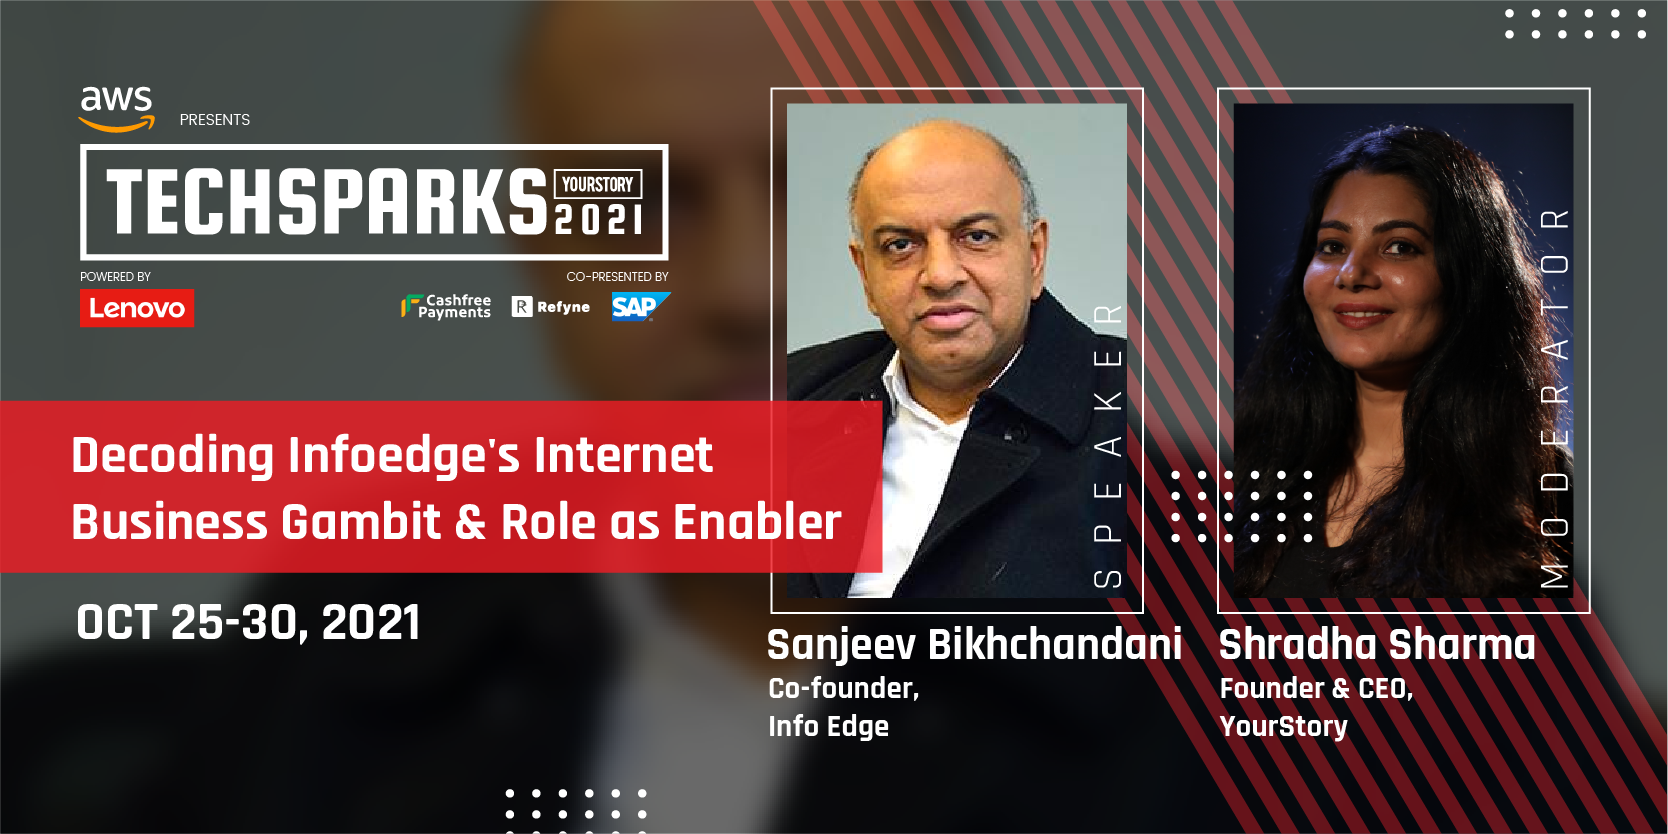 It all boils down to trust, people and customers, says Sanjeev Bikhchandani, original pioneer of India’s internet tech ecosystem, at TechSparks 2021
